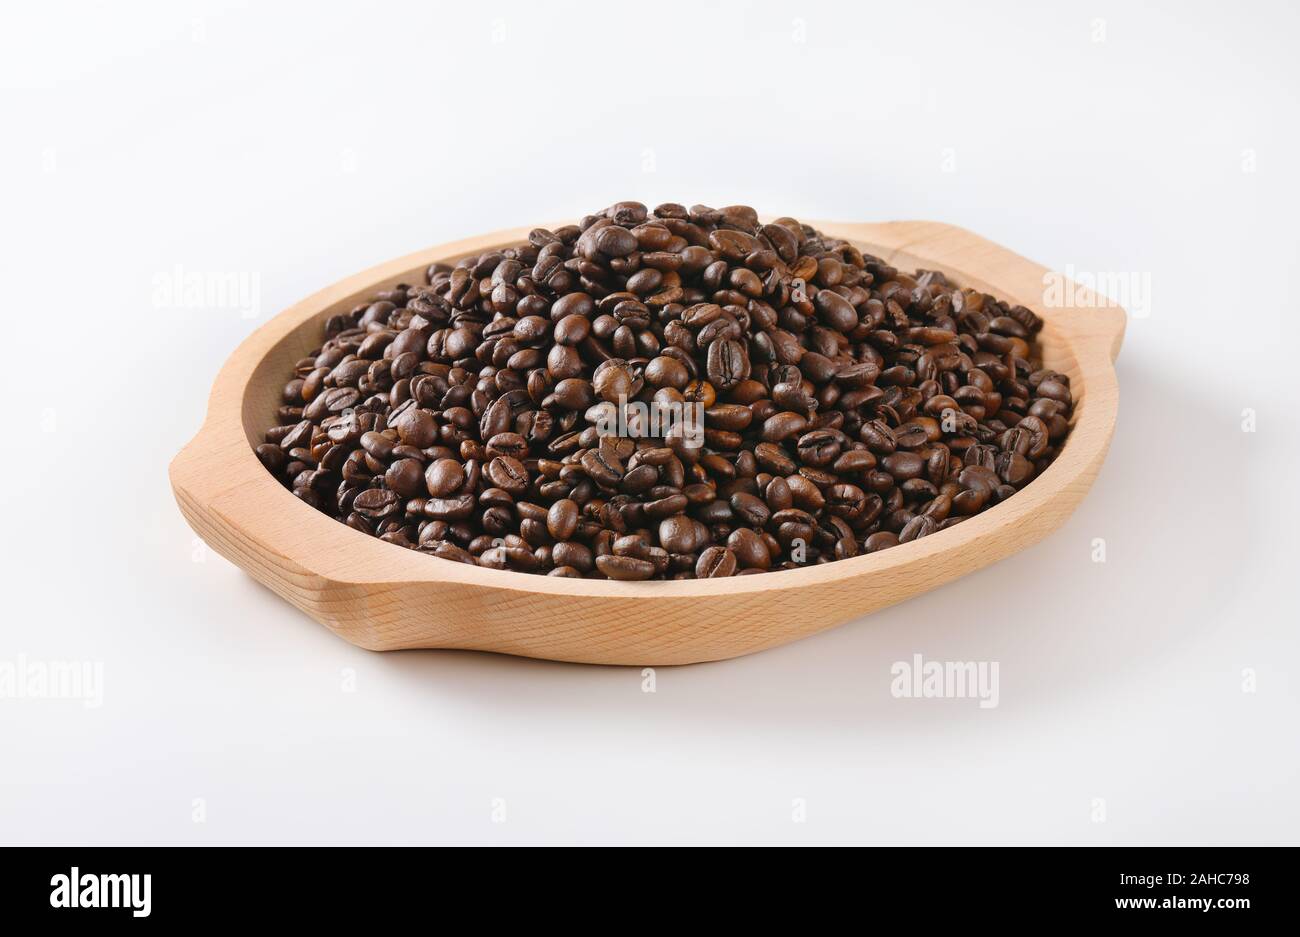 Roasted coffee beans on wooden tray Stock Photo